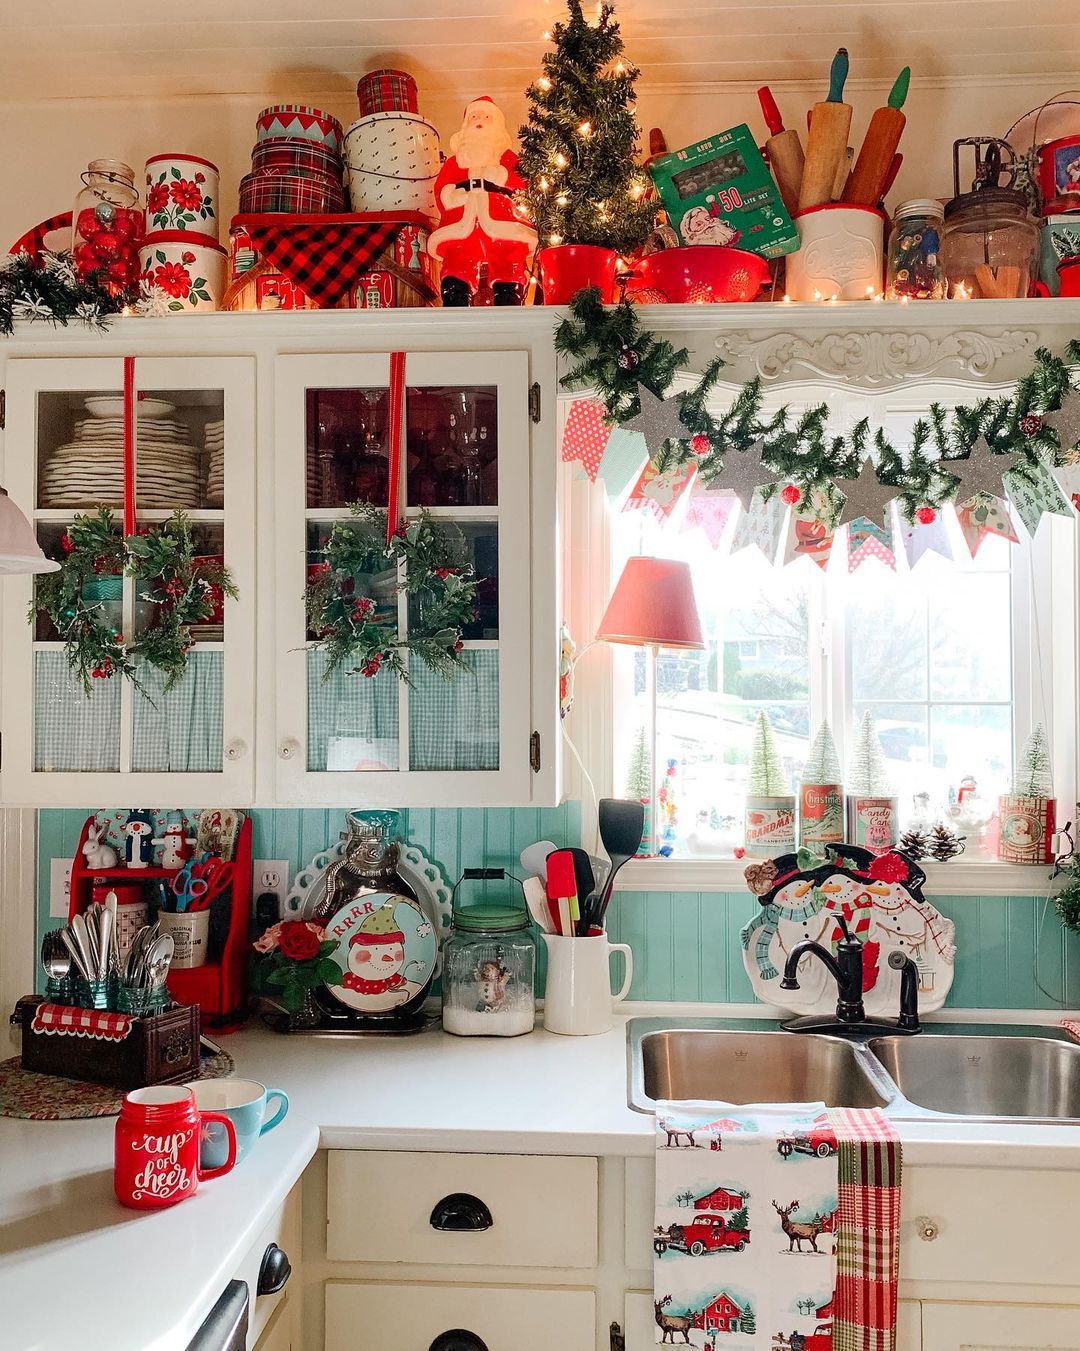 How to Give Your Kitchen Some Christmas Touches - Talkdecor